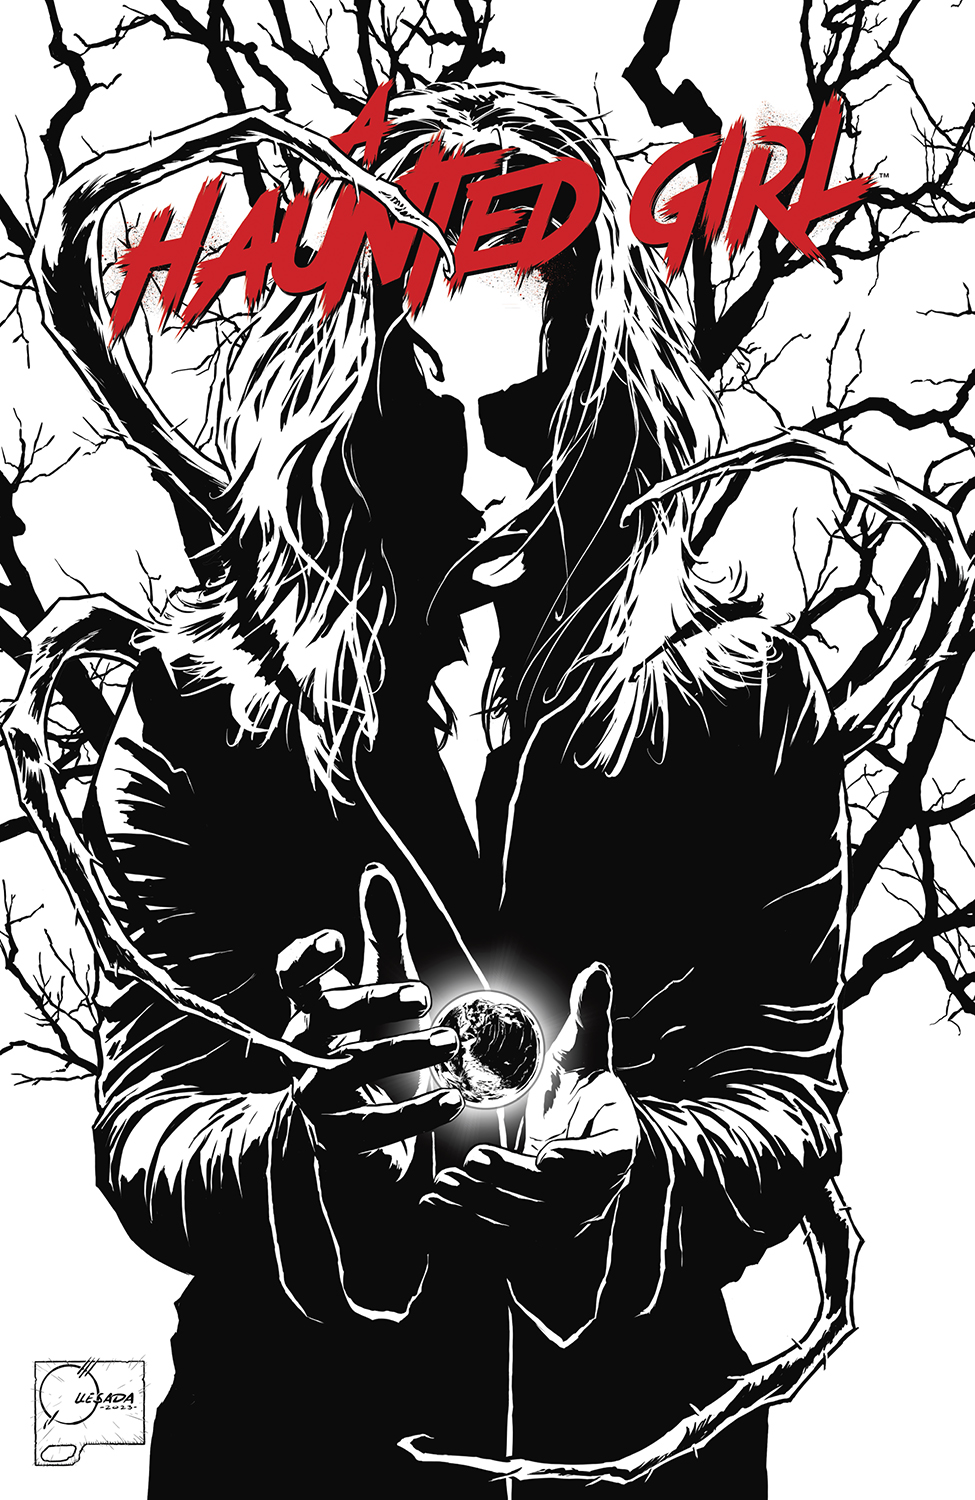 A Haunted Girl #1 Cover D 1 for 25 Incentive Quesada (Of 4)